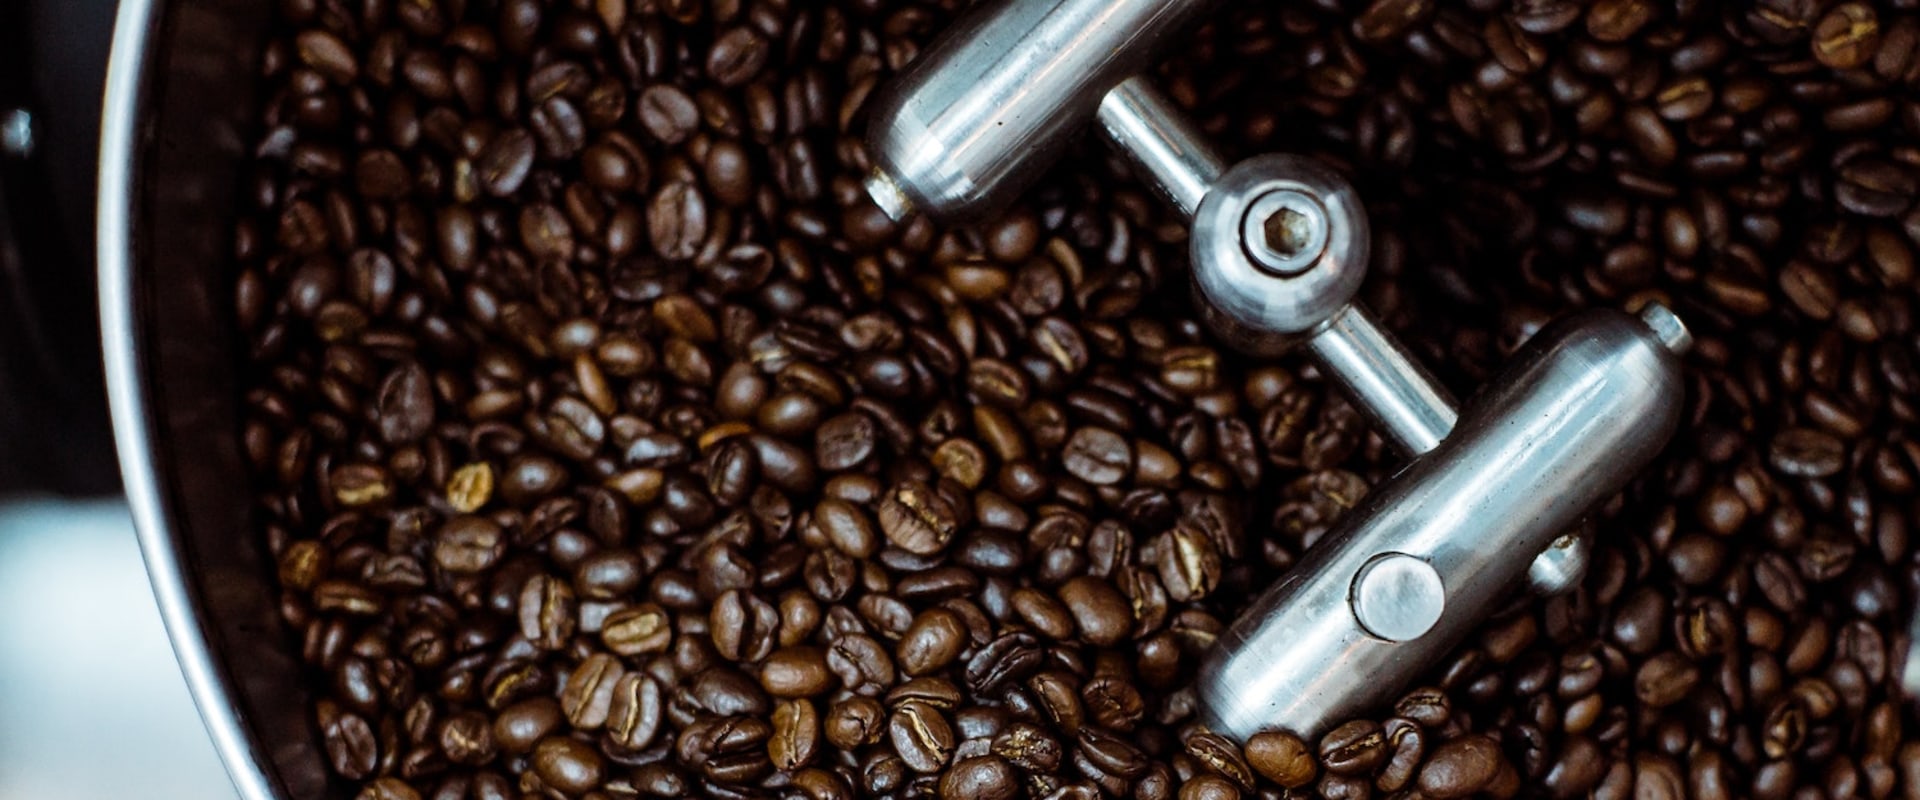 How can a coffee business be sustainable?